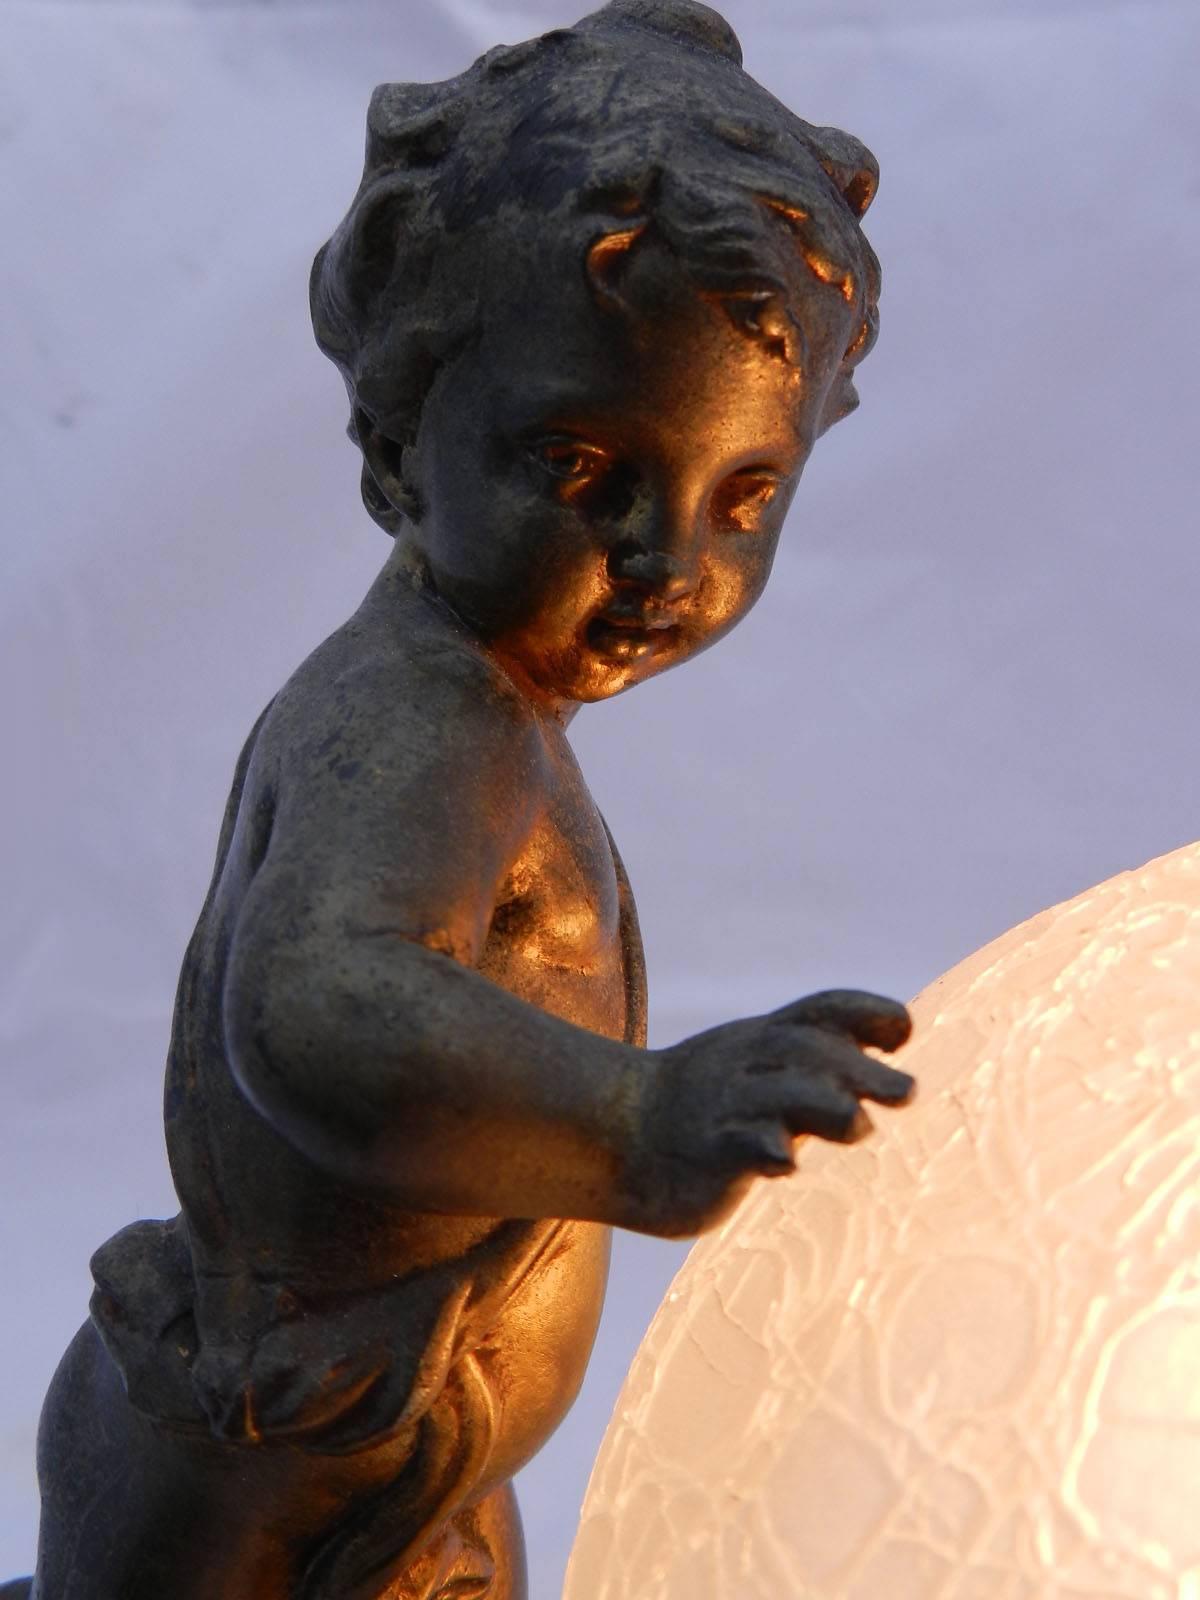 Charming French Art Deco table lamp Putti globe night light, circa 1930
Marble base, gilded spelter figure and original craquelure glass globe
In very good condition with no losses to glass, gilding has a good patina worn through time and use
This